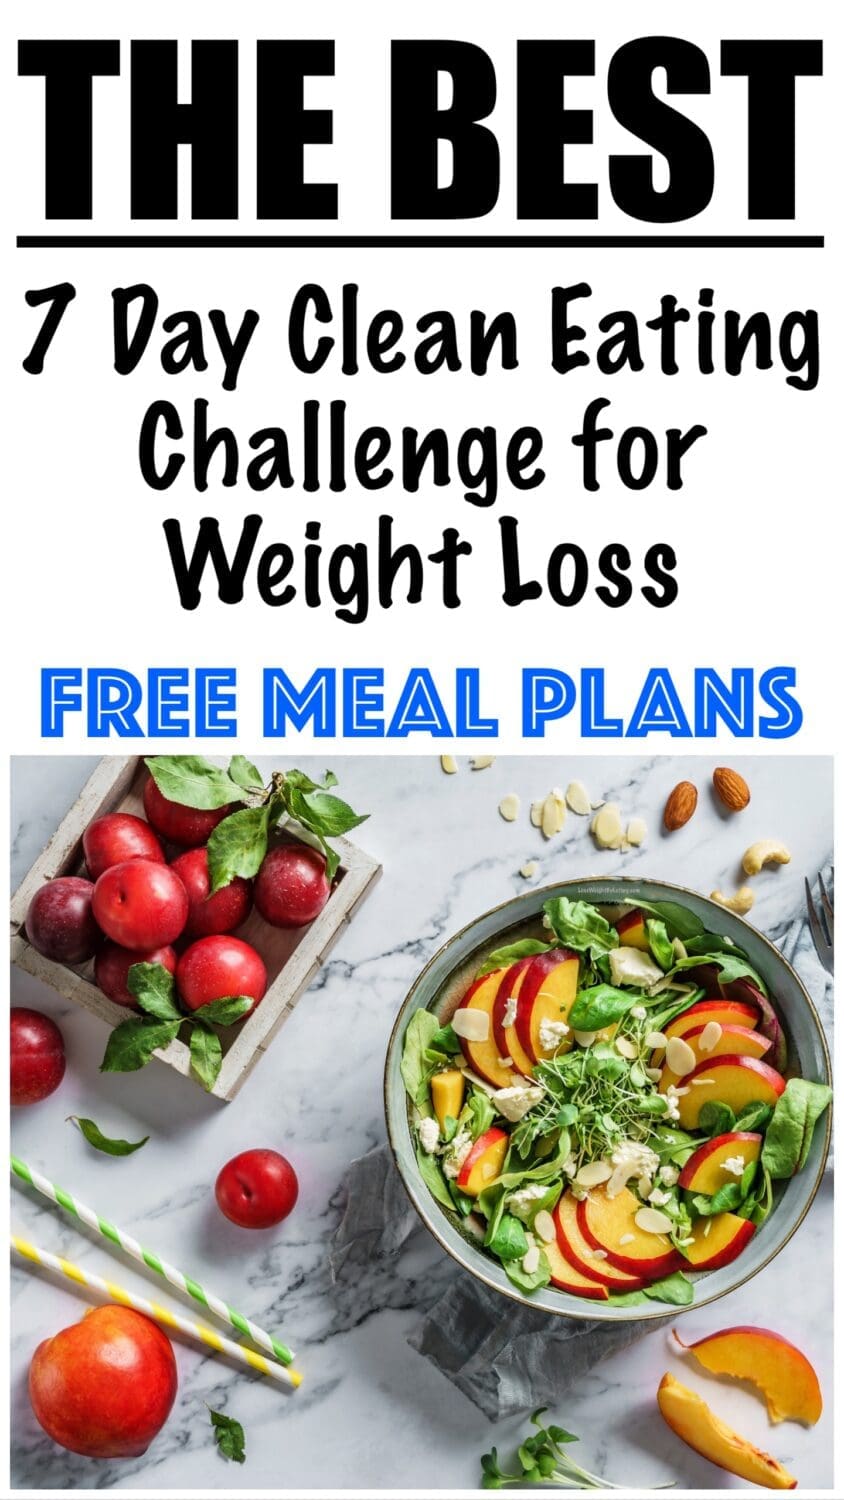 7 Day Clean Eating Challenge for Weight Loss (FREE Meal Plan)